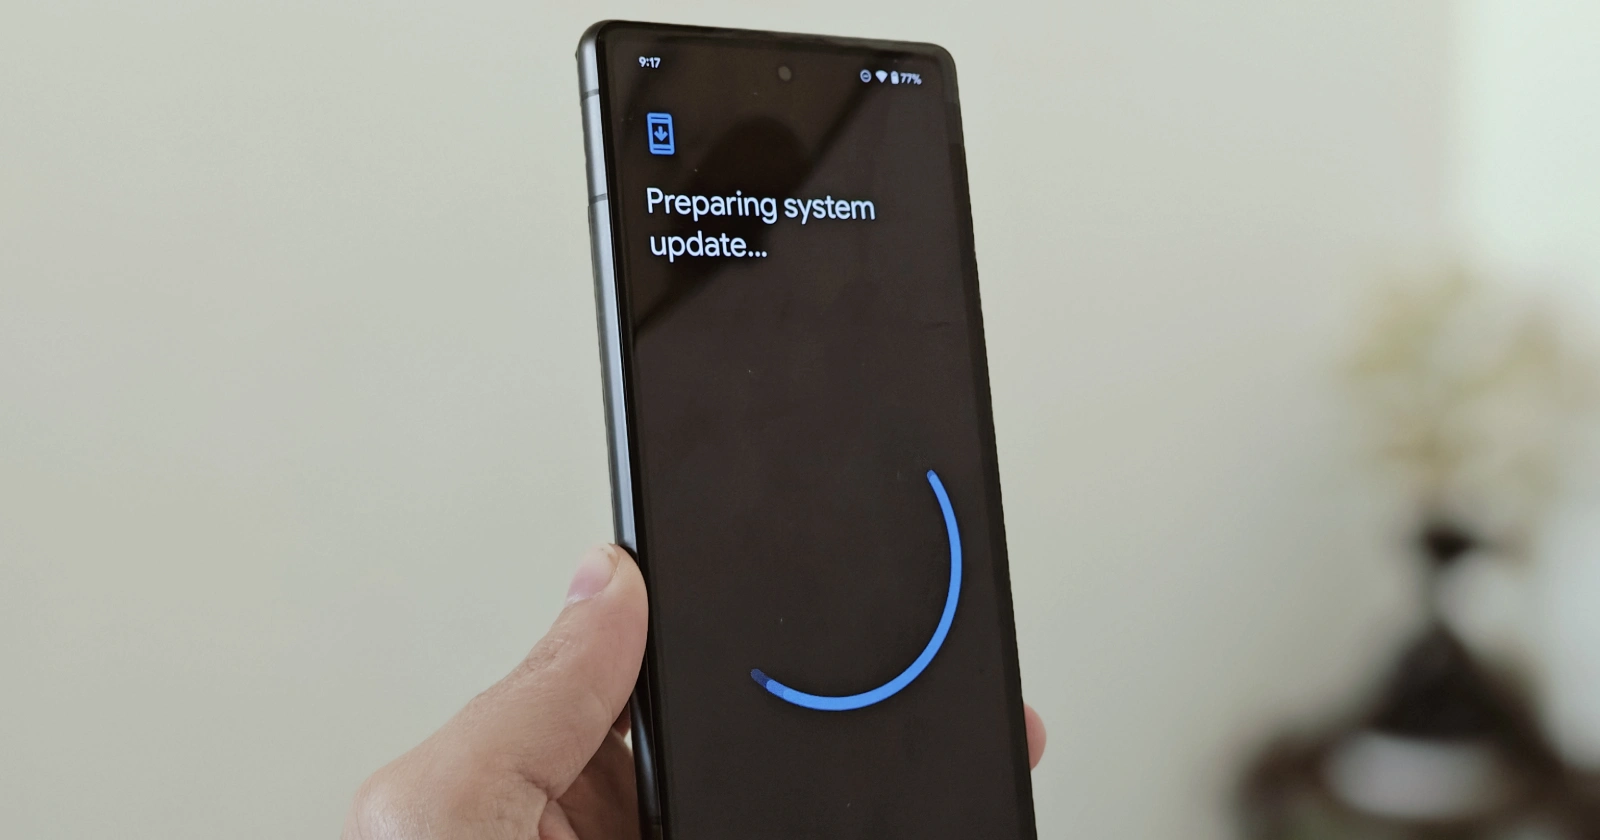 Latest April patch reportedly resolves some network issues on Pixel phones